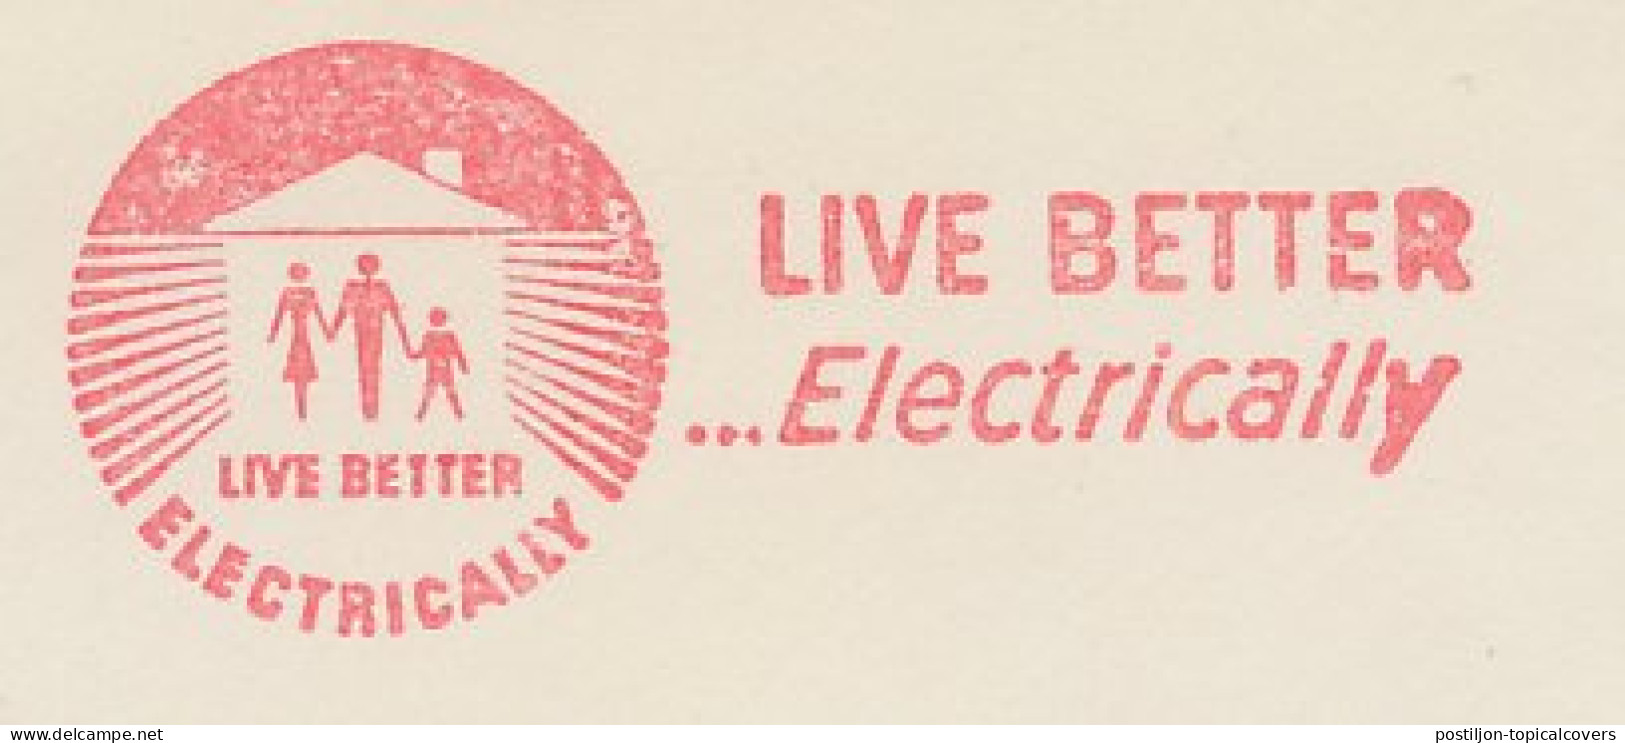 Meter Cut USA 1958 Live Beteer - Electrically - Electricité